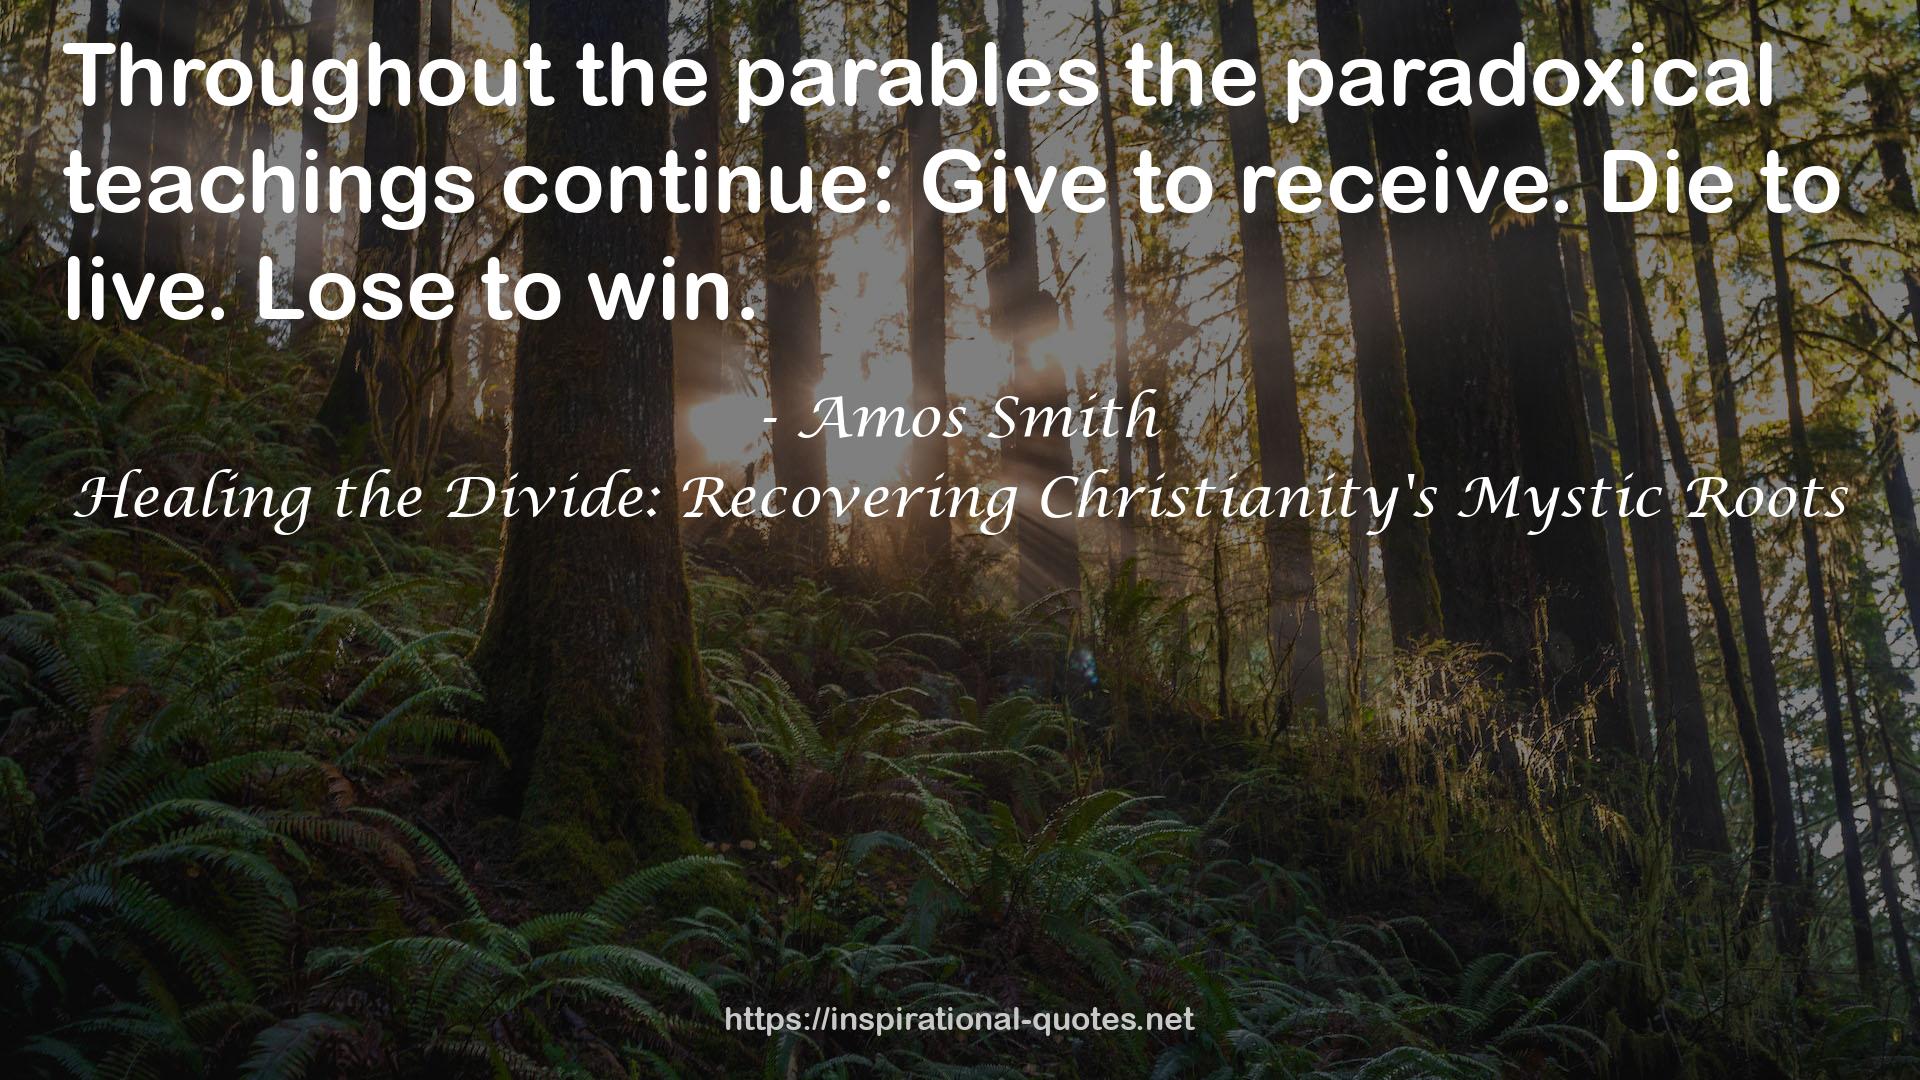 Healing the Divide: Recovering Christianity's Mystic Roots QUOTES